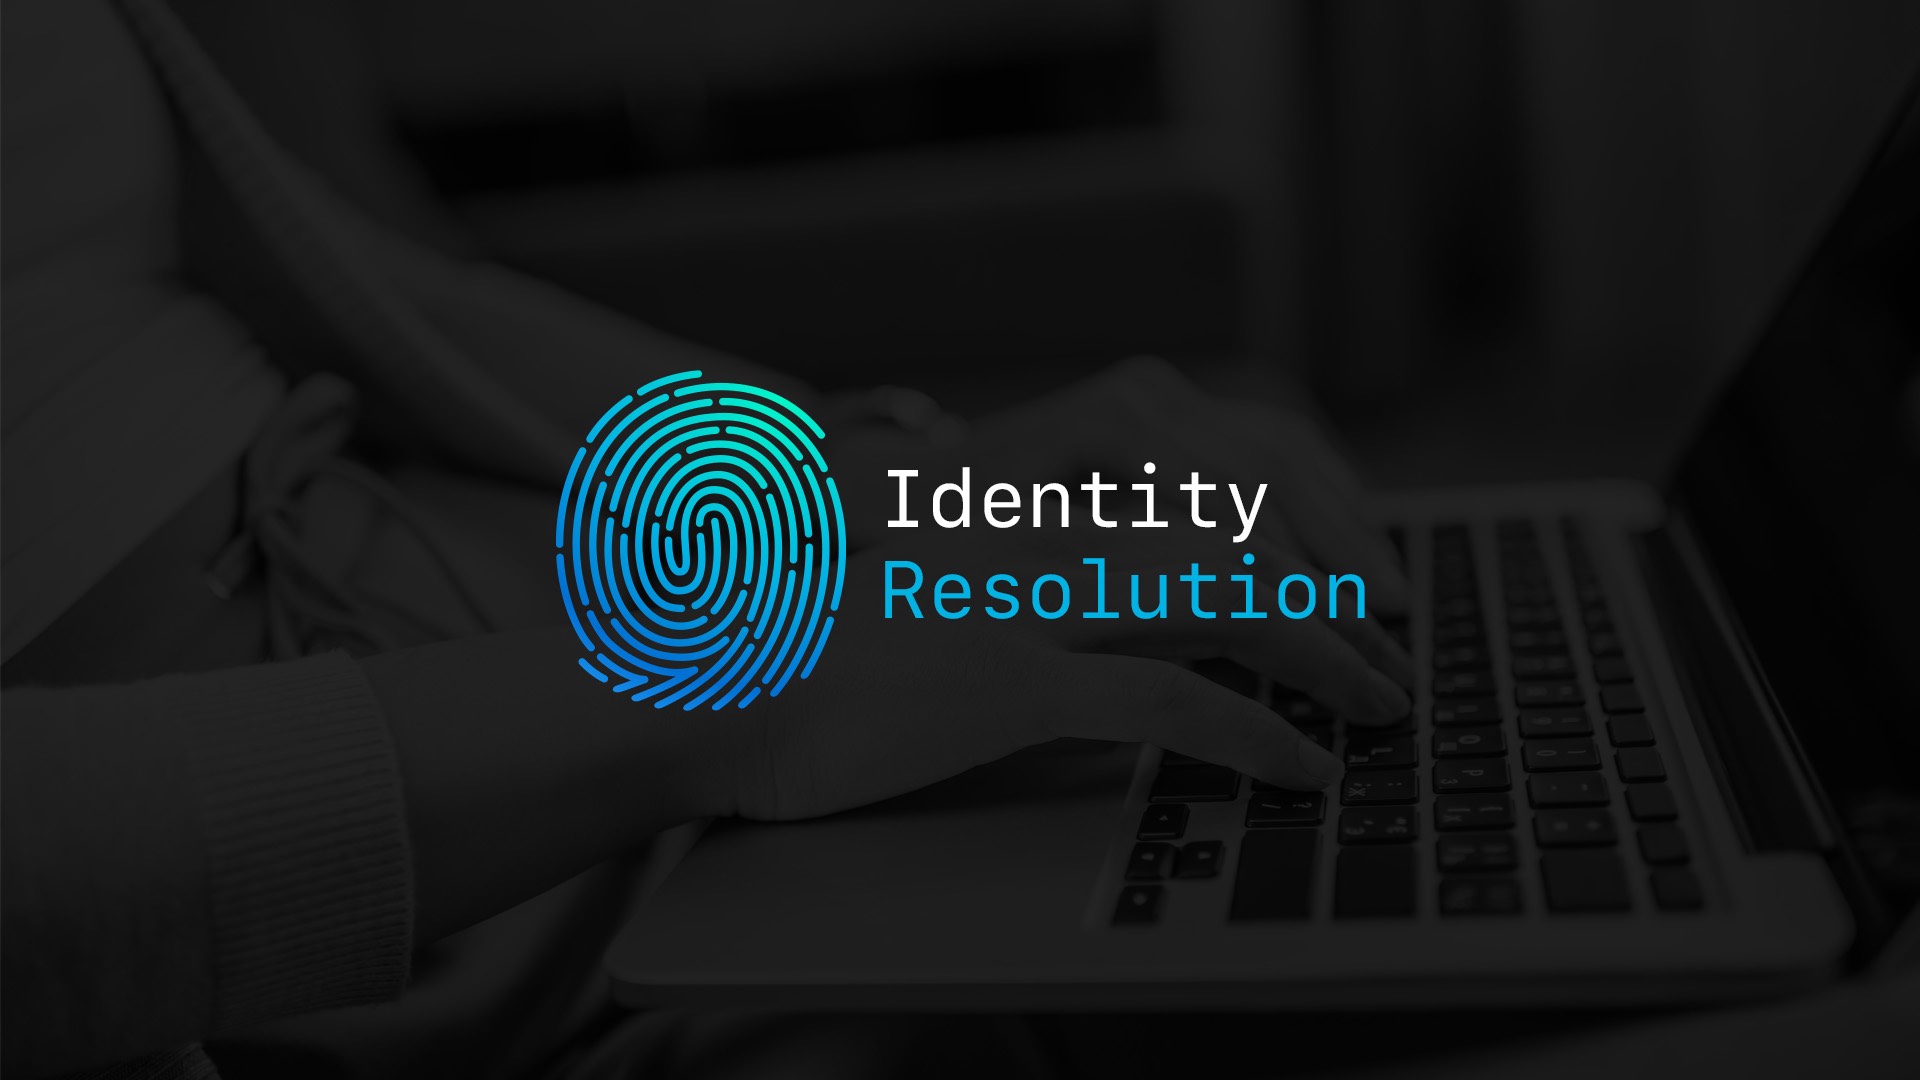 Should Your Small Business Focus on Identity Resolution? 